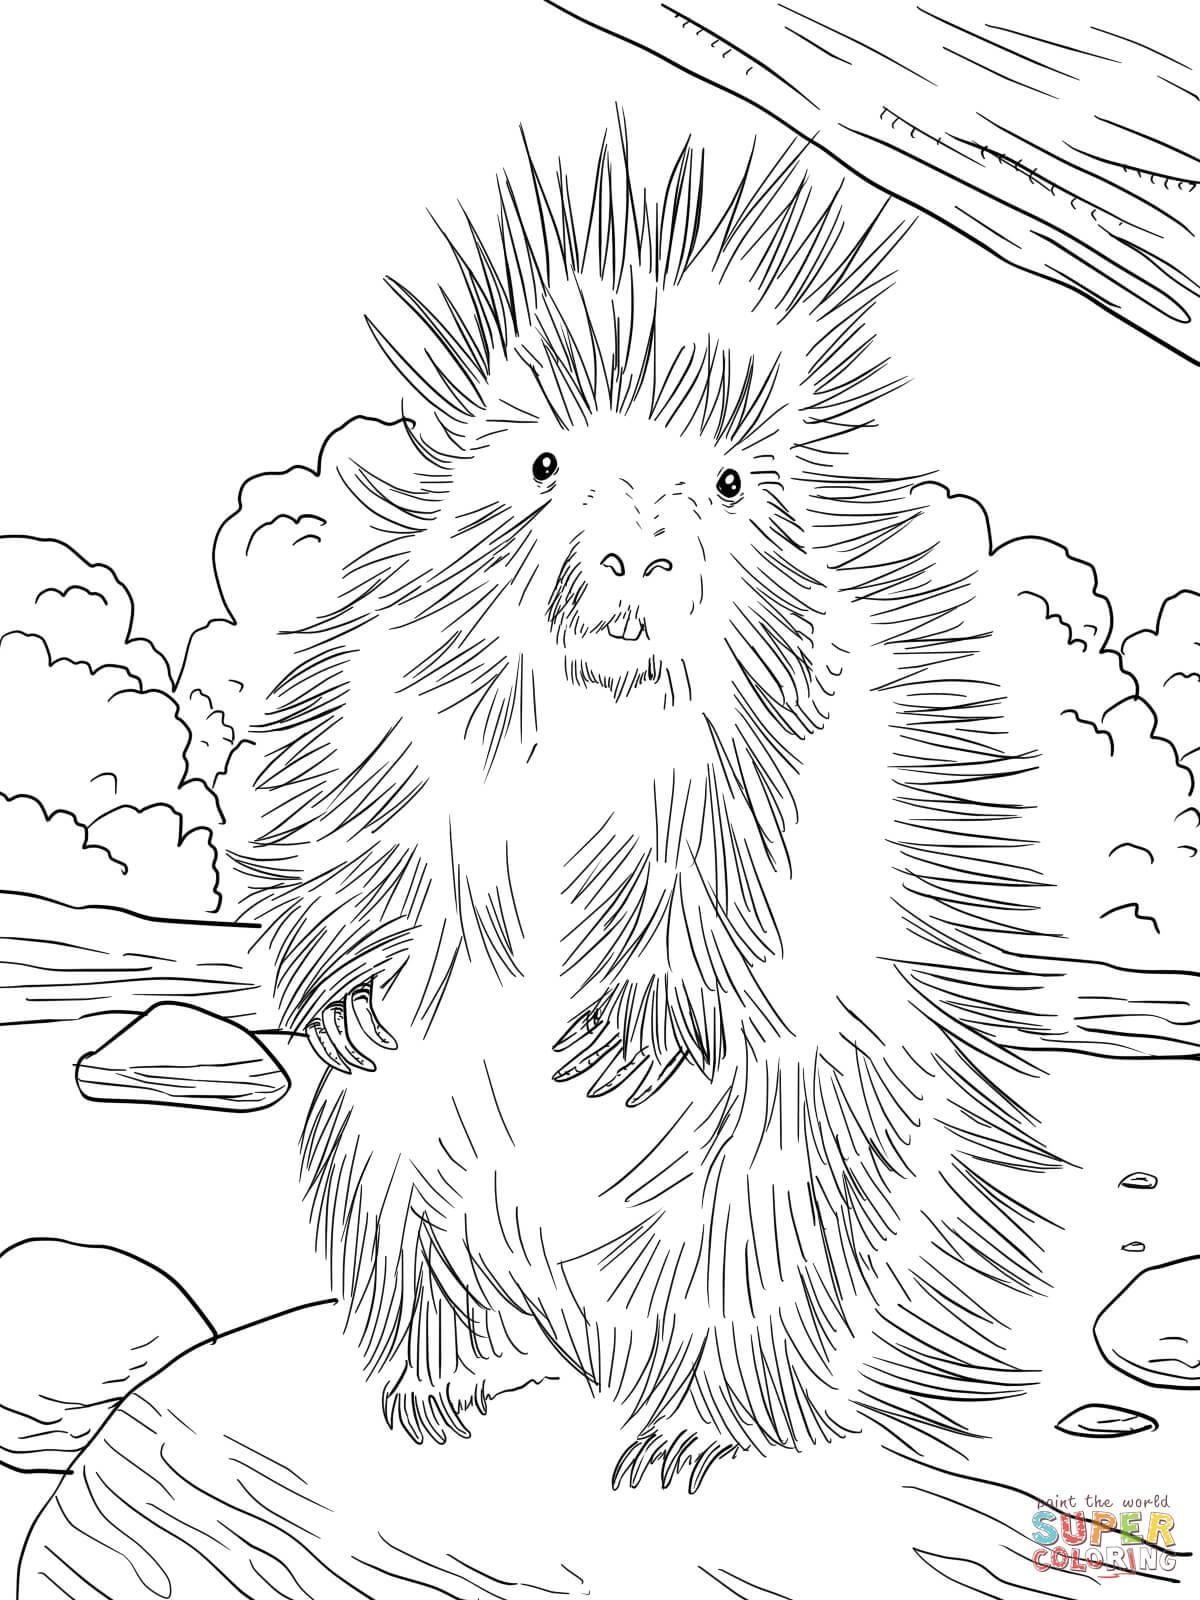 Porcupine Coloring Pages
 Porcupine Free Colouring Pages